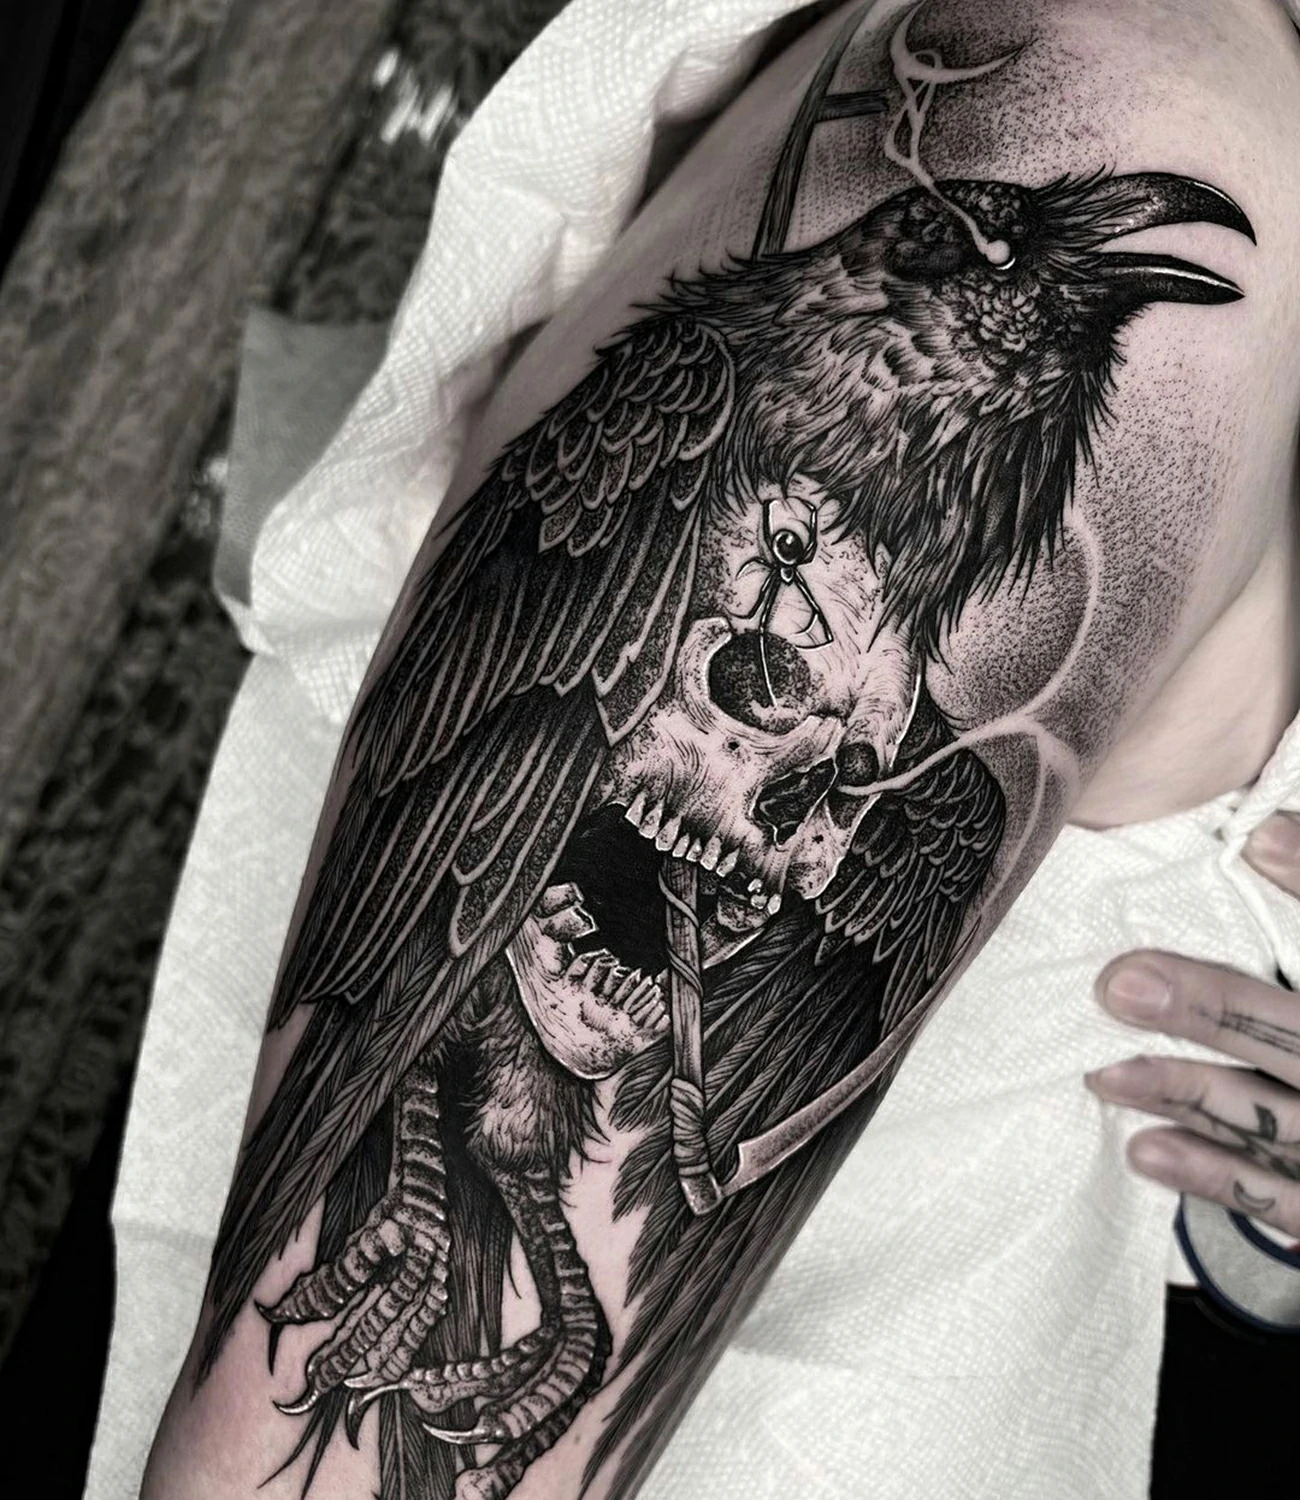 Gothic raven tattoo: A raven tattoo with gothic elements, creating a dark and mysterious vibe.